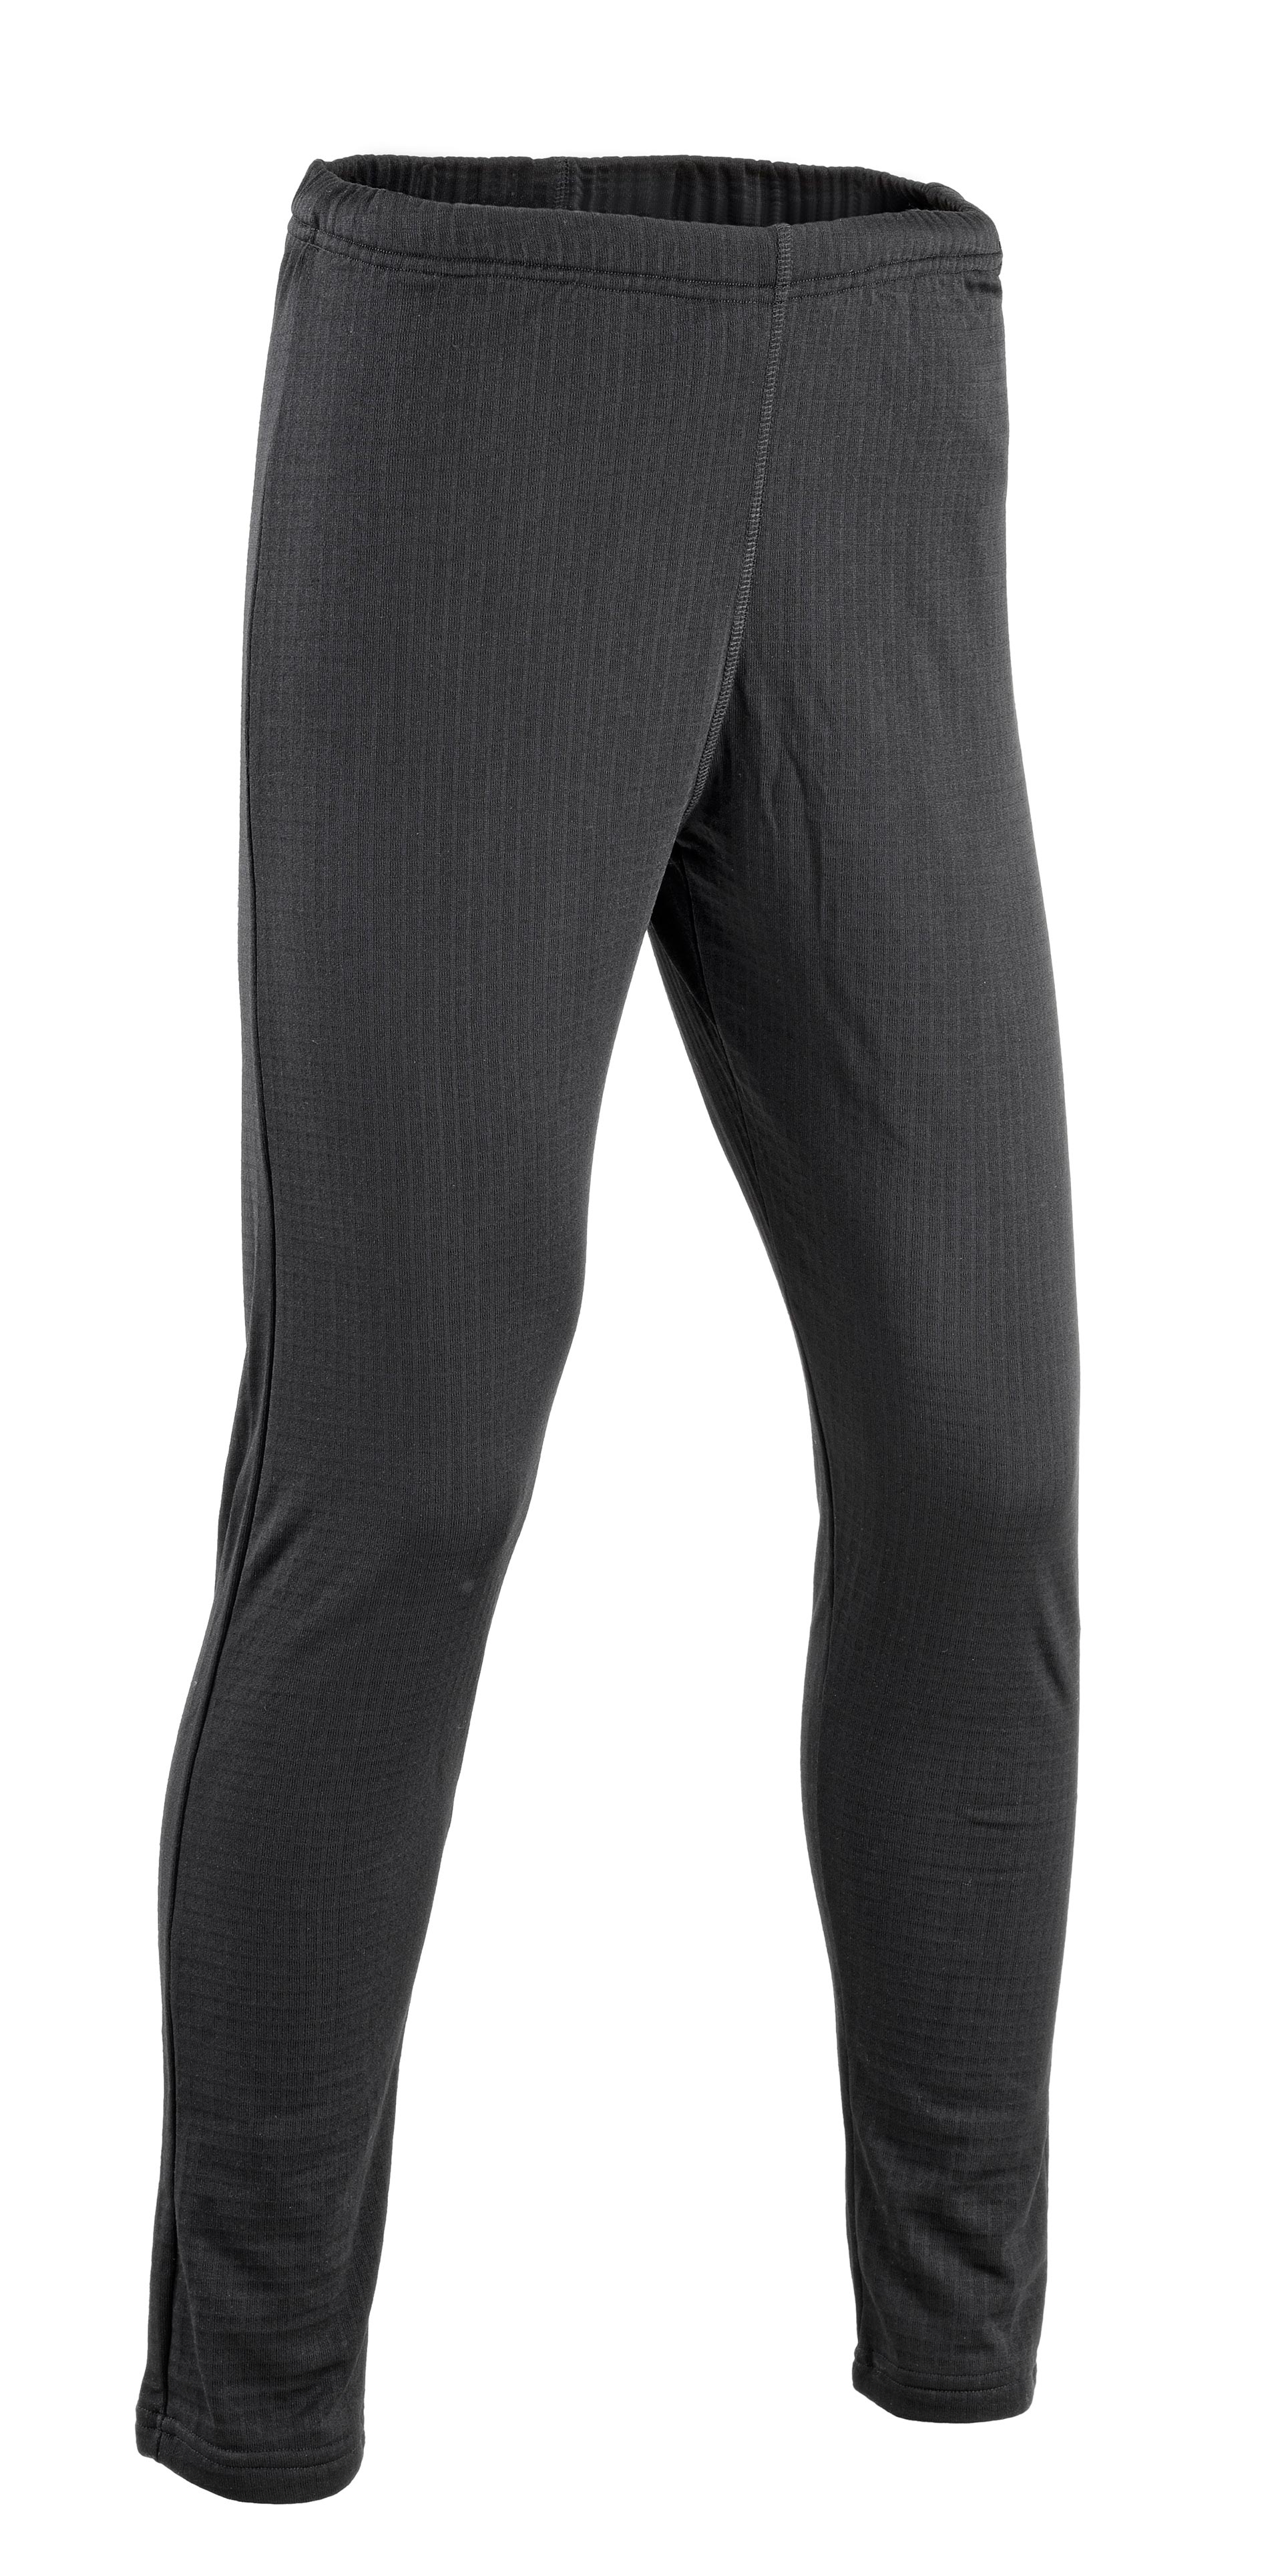 DEFCON 5 THERMAL PANTS LEVEL 2 - D5-PANT-II - Trousers and Shorts ...